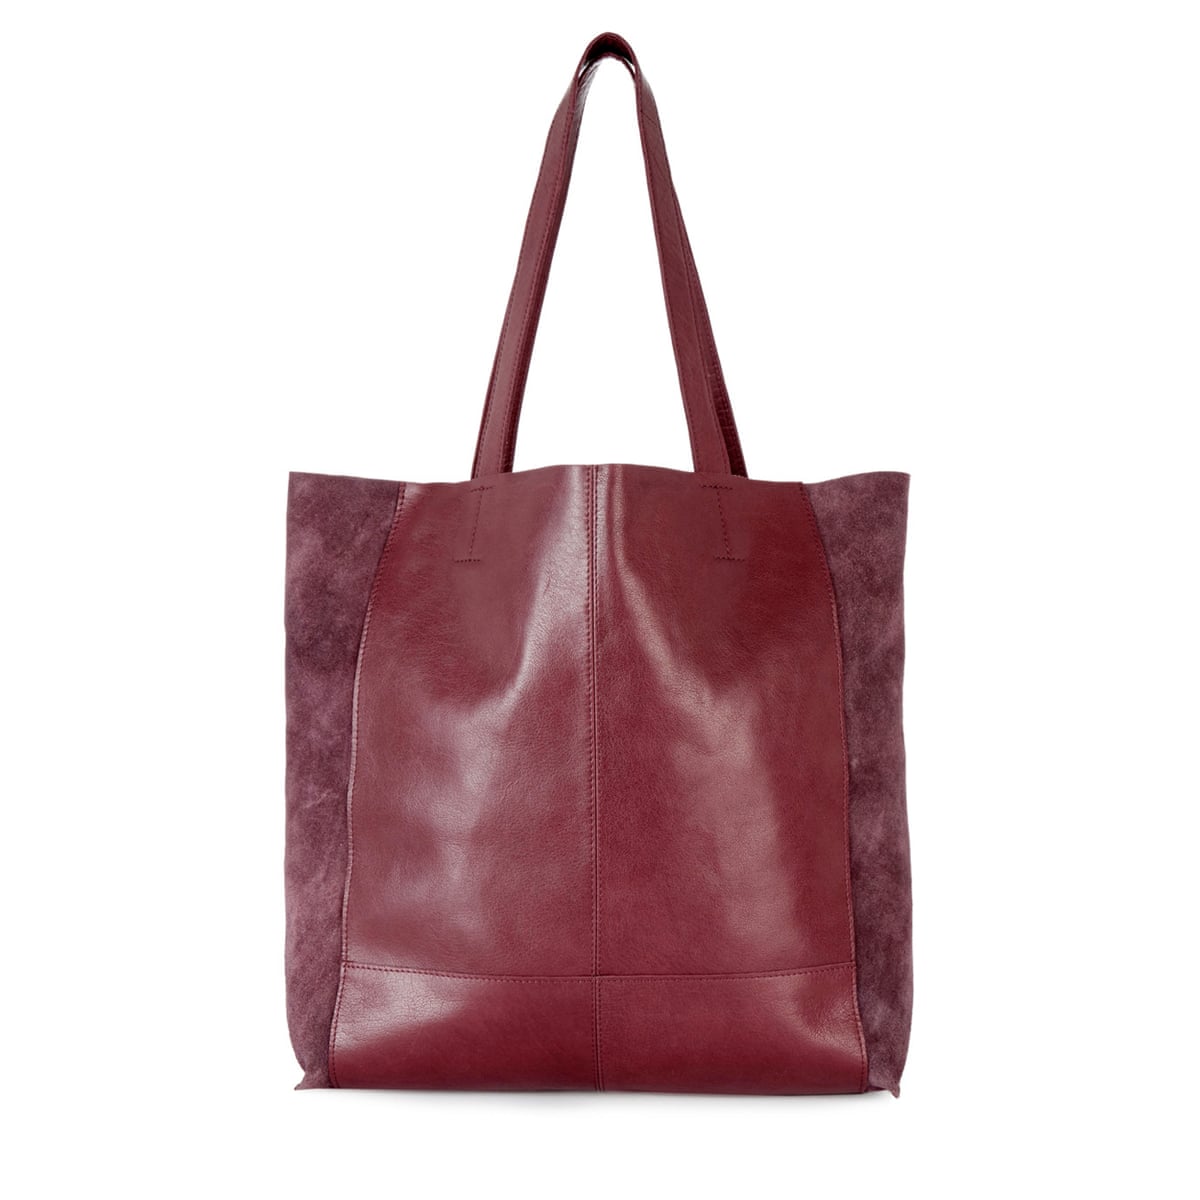 Totes in: 10 bags to use instead of plastic ones | Fashion | The Guardian